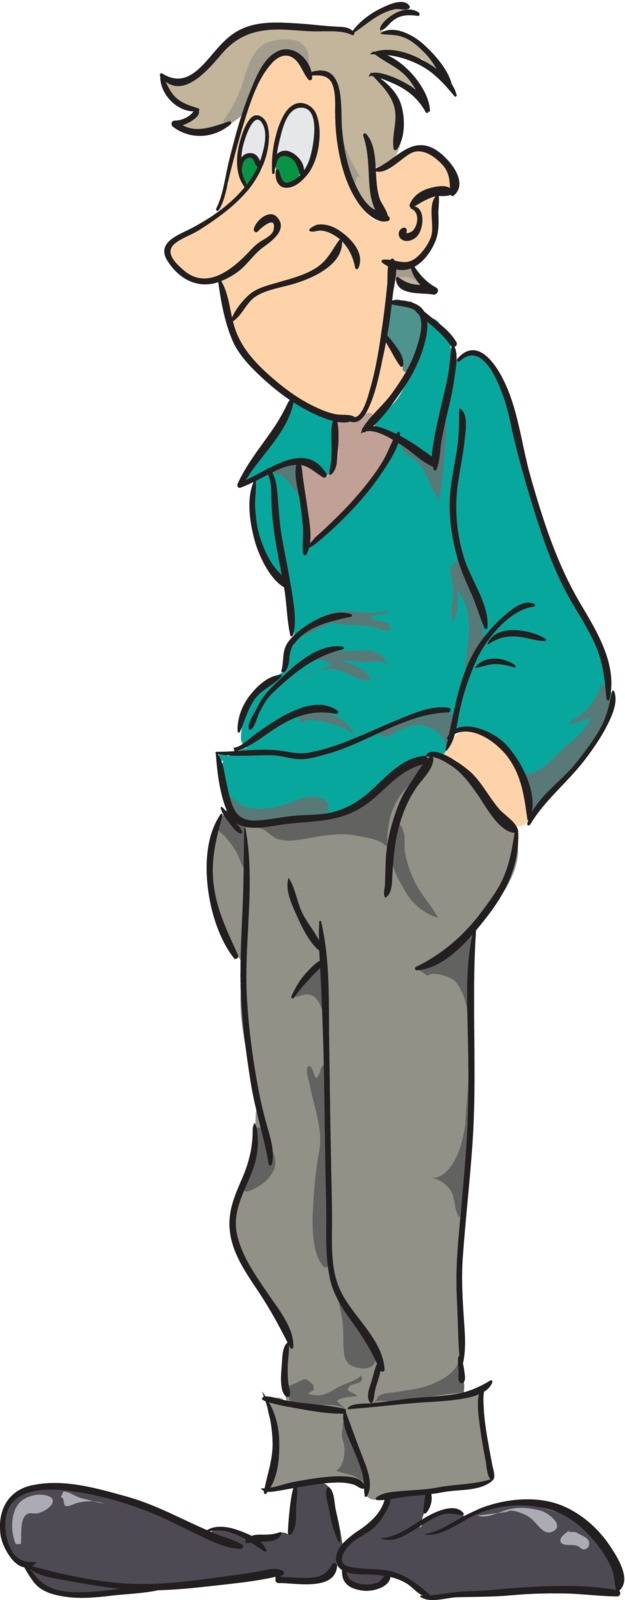 Teenager holding hands in the pockets of his pants. Vector illustration.